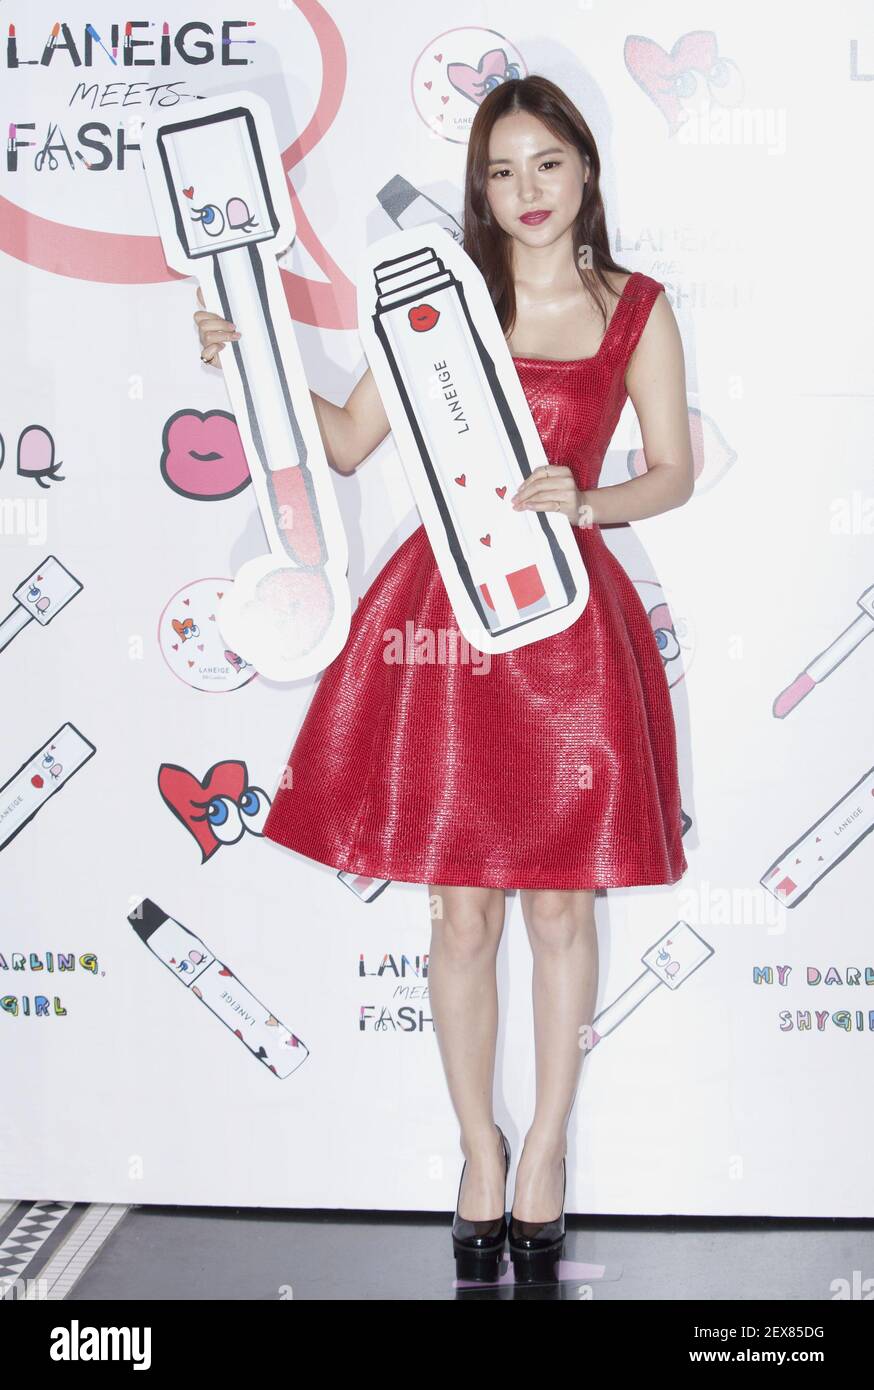 28 July 2015 - Seoul, South Korea : South Korean actress Min Hyo-Rin, attends a photo call for the cosmetic brand Laneige meets Fashion 'Laneige x Play Nomore' collaboration launching event in Seoul, South Korea on July 28, 2015. Photo Credit: Lee Young-ho *** Please Use Credit from Credit Field *** Stock Photo